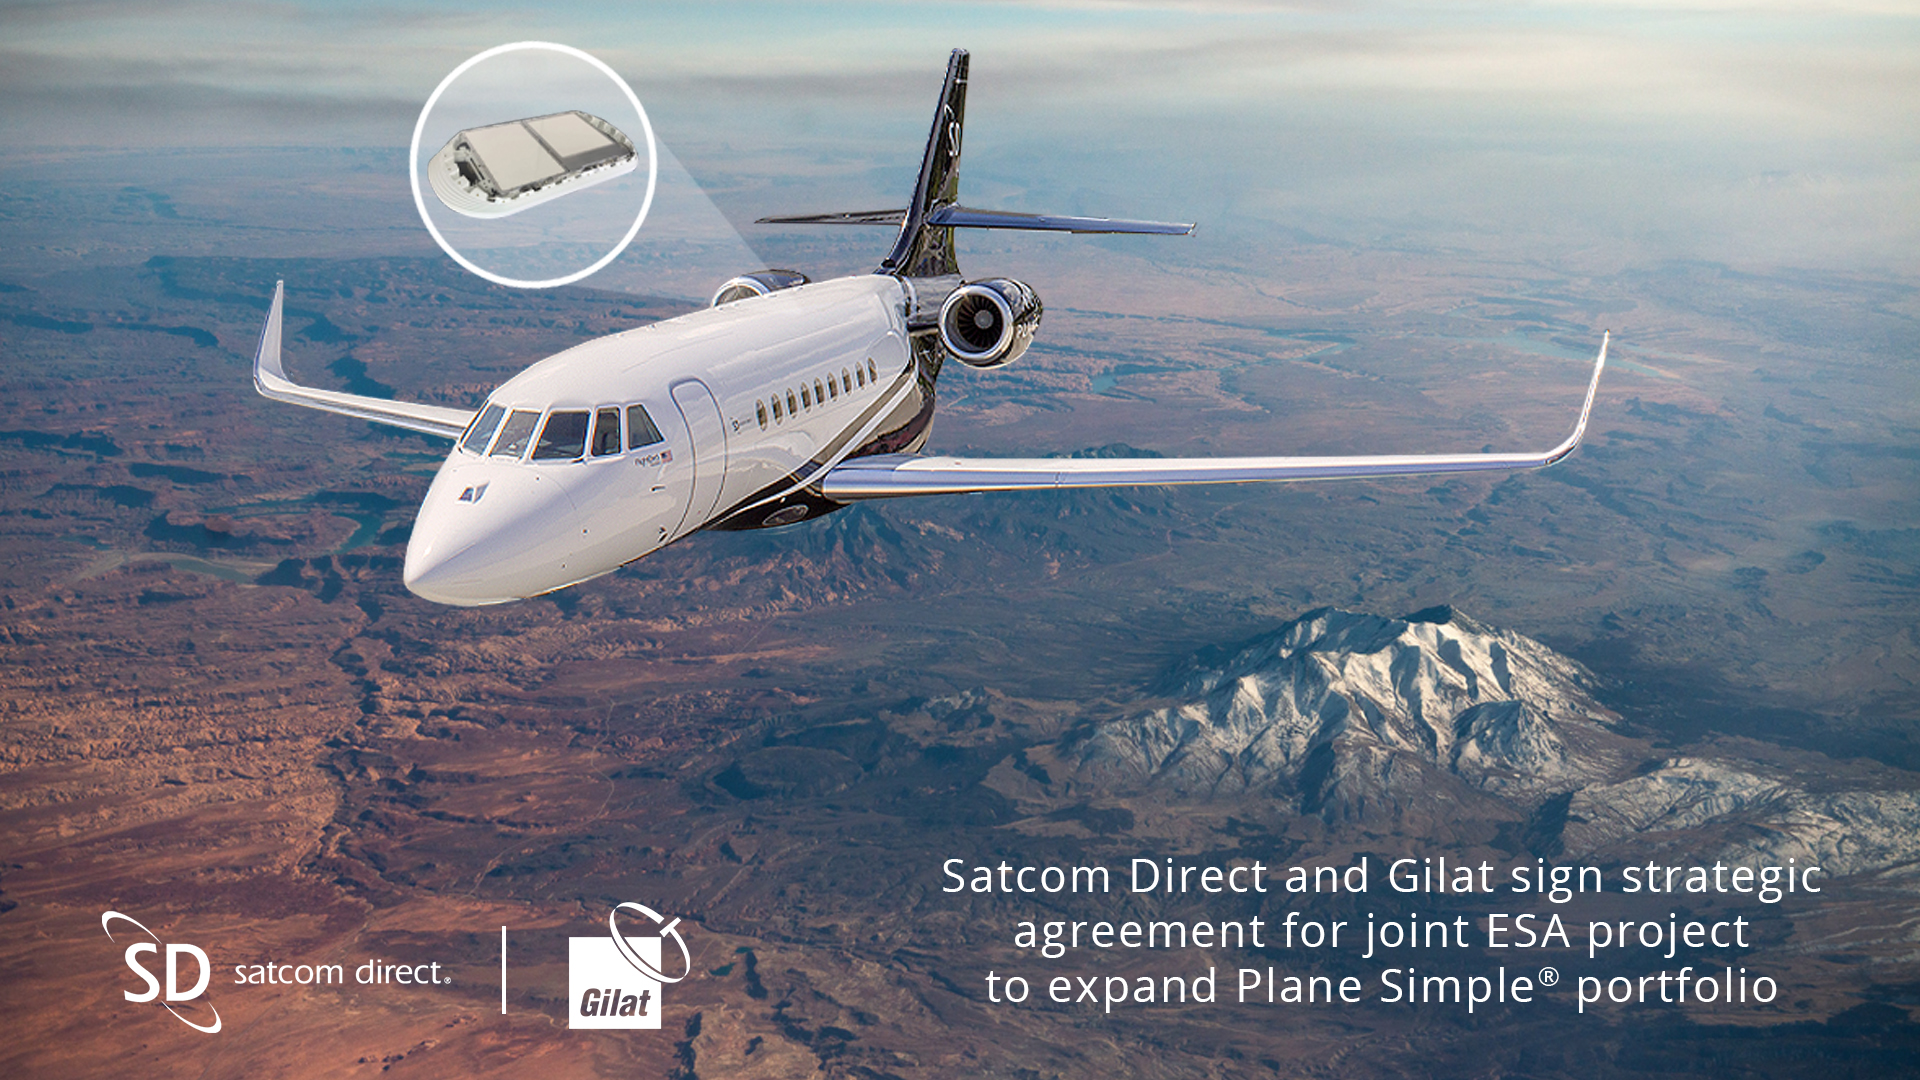 Satcom Direct and Gilat Sign Strategic Agreement for Joint ESA Project to Expand Plane Simple® Portfolio